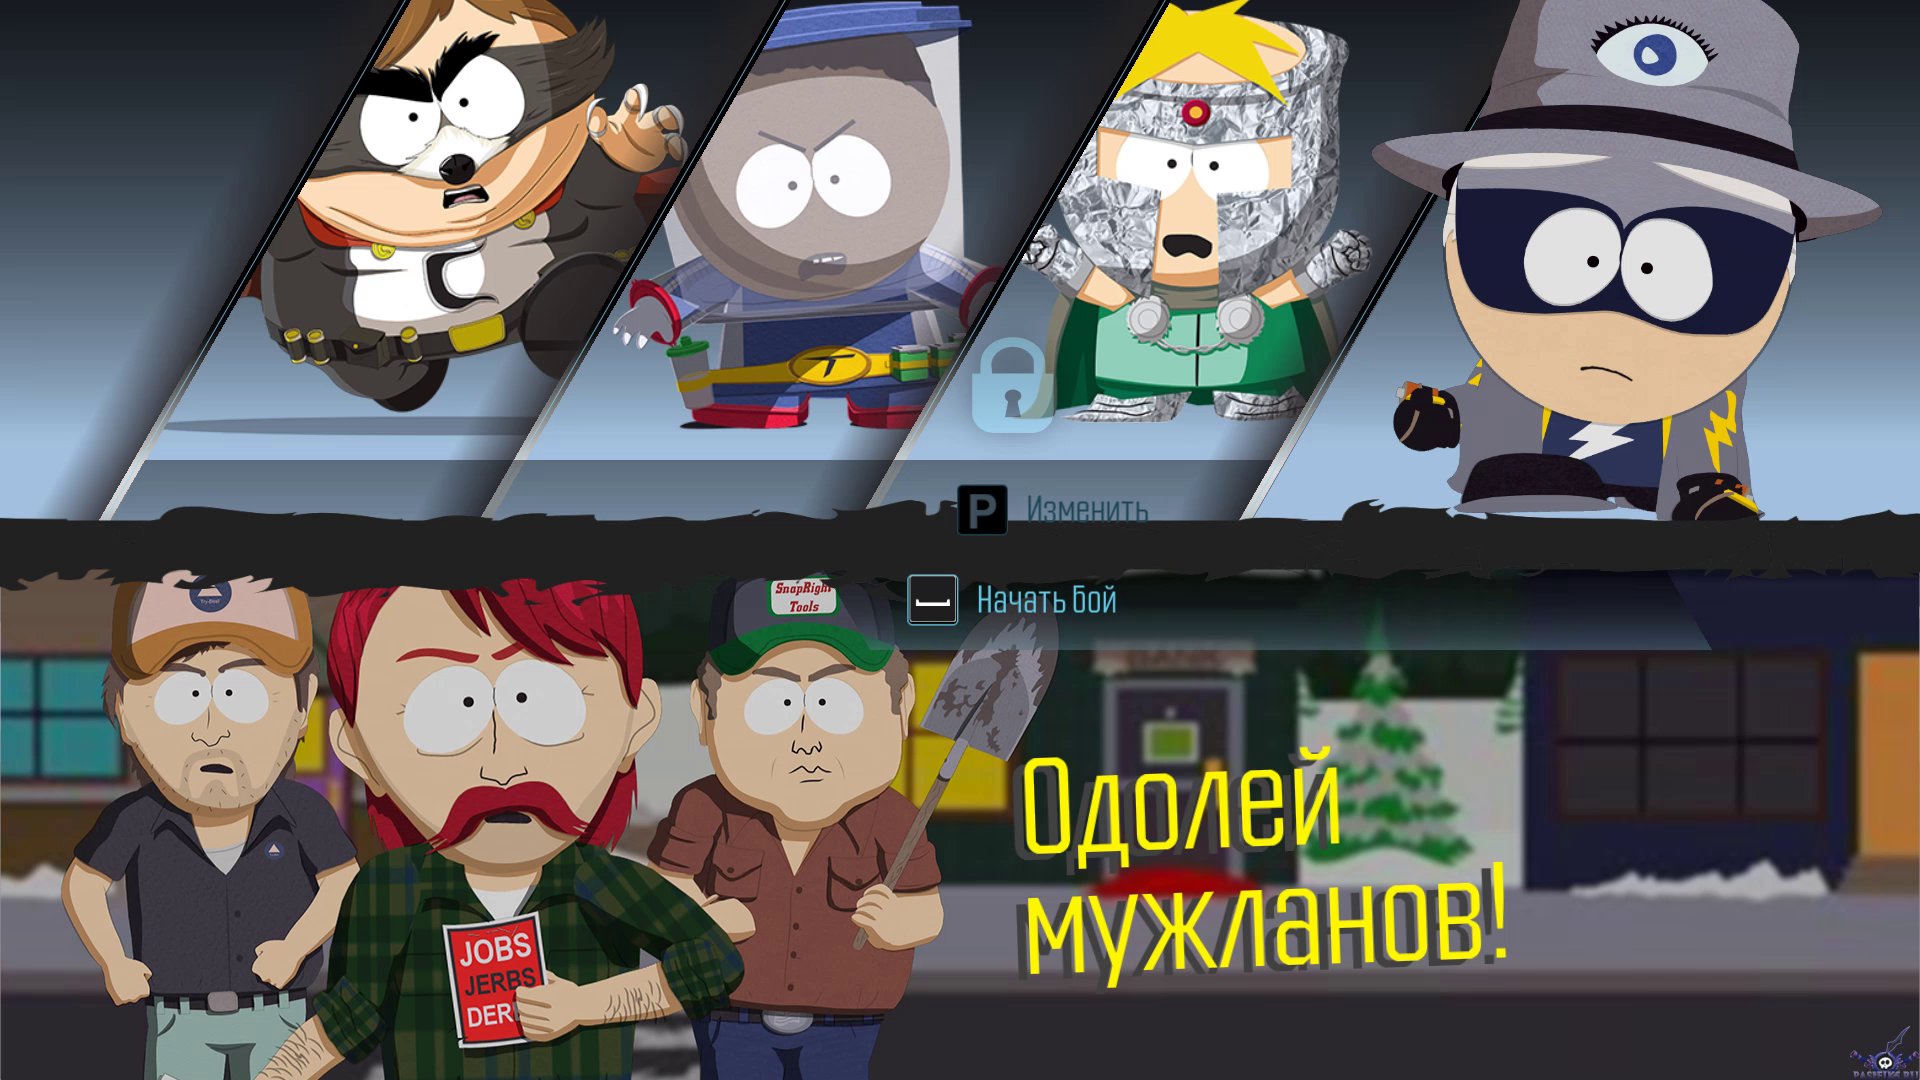 South park the fractured but whole купить ключ steam дешево фото 36